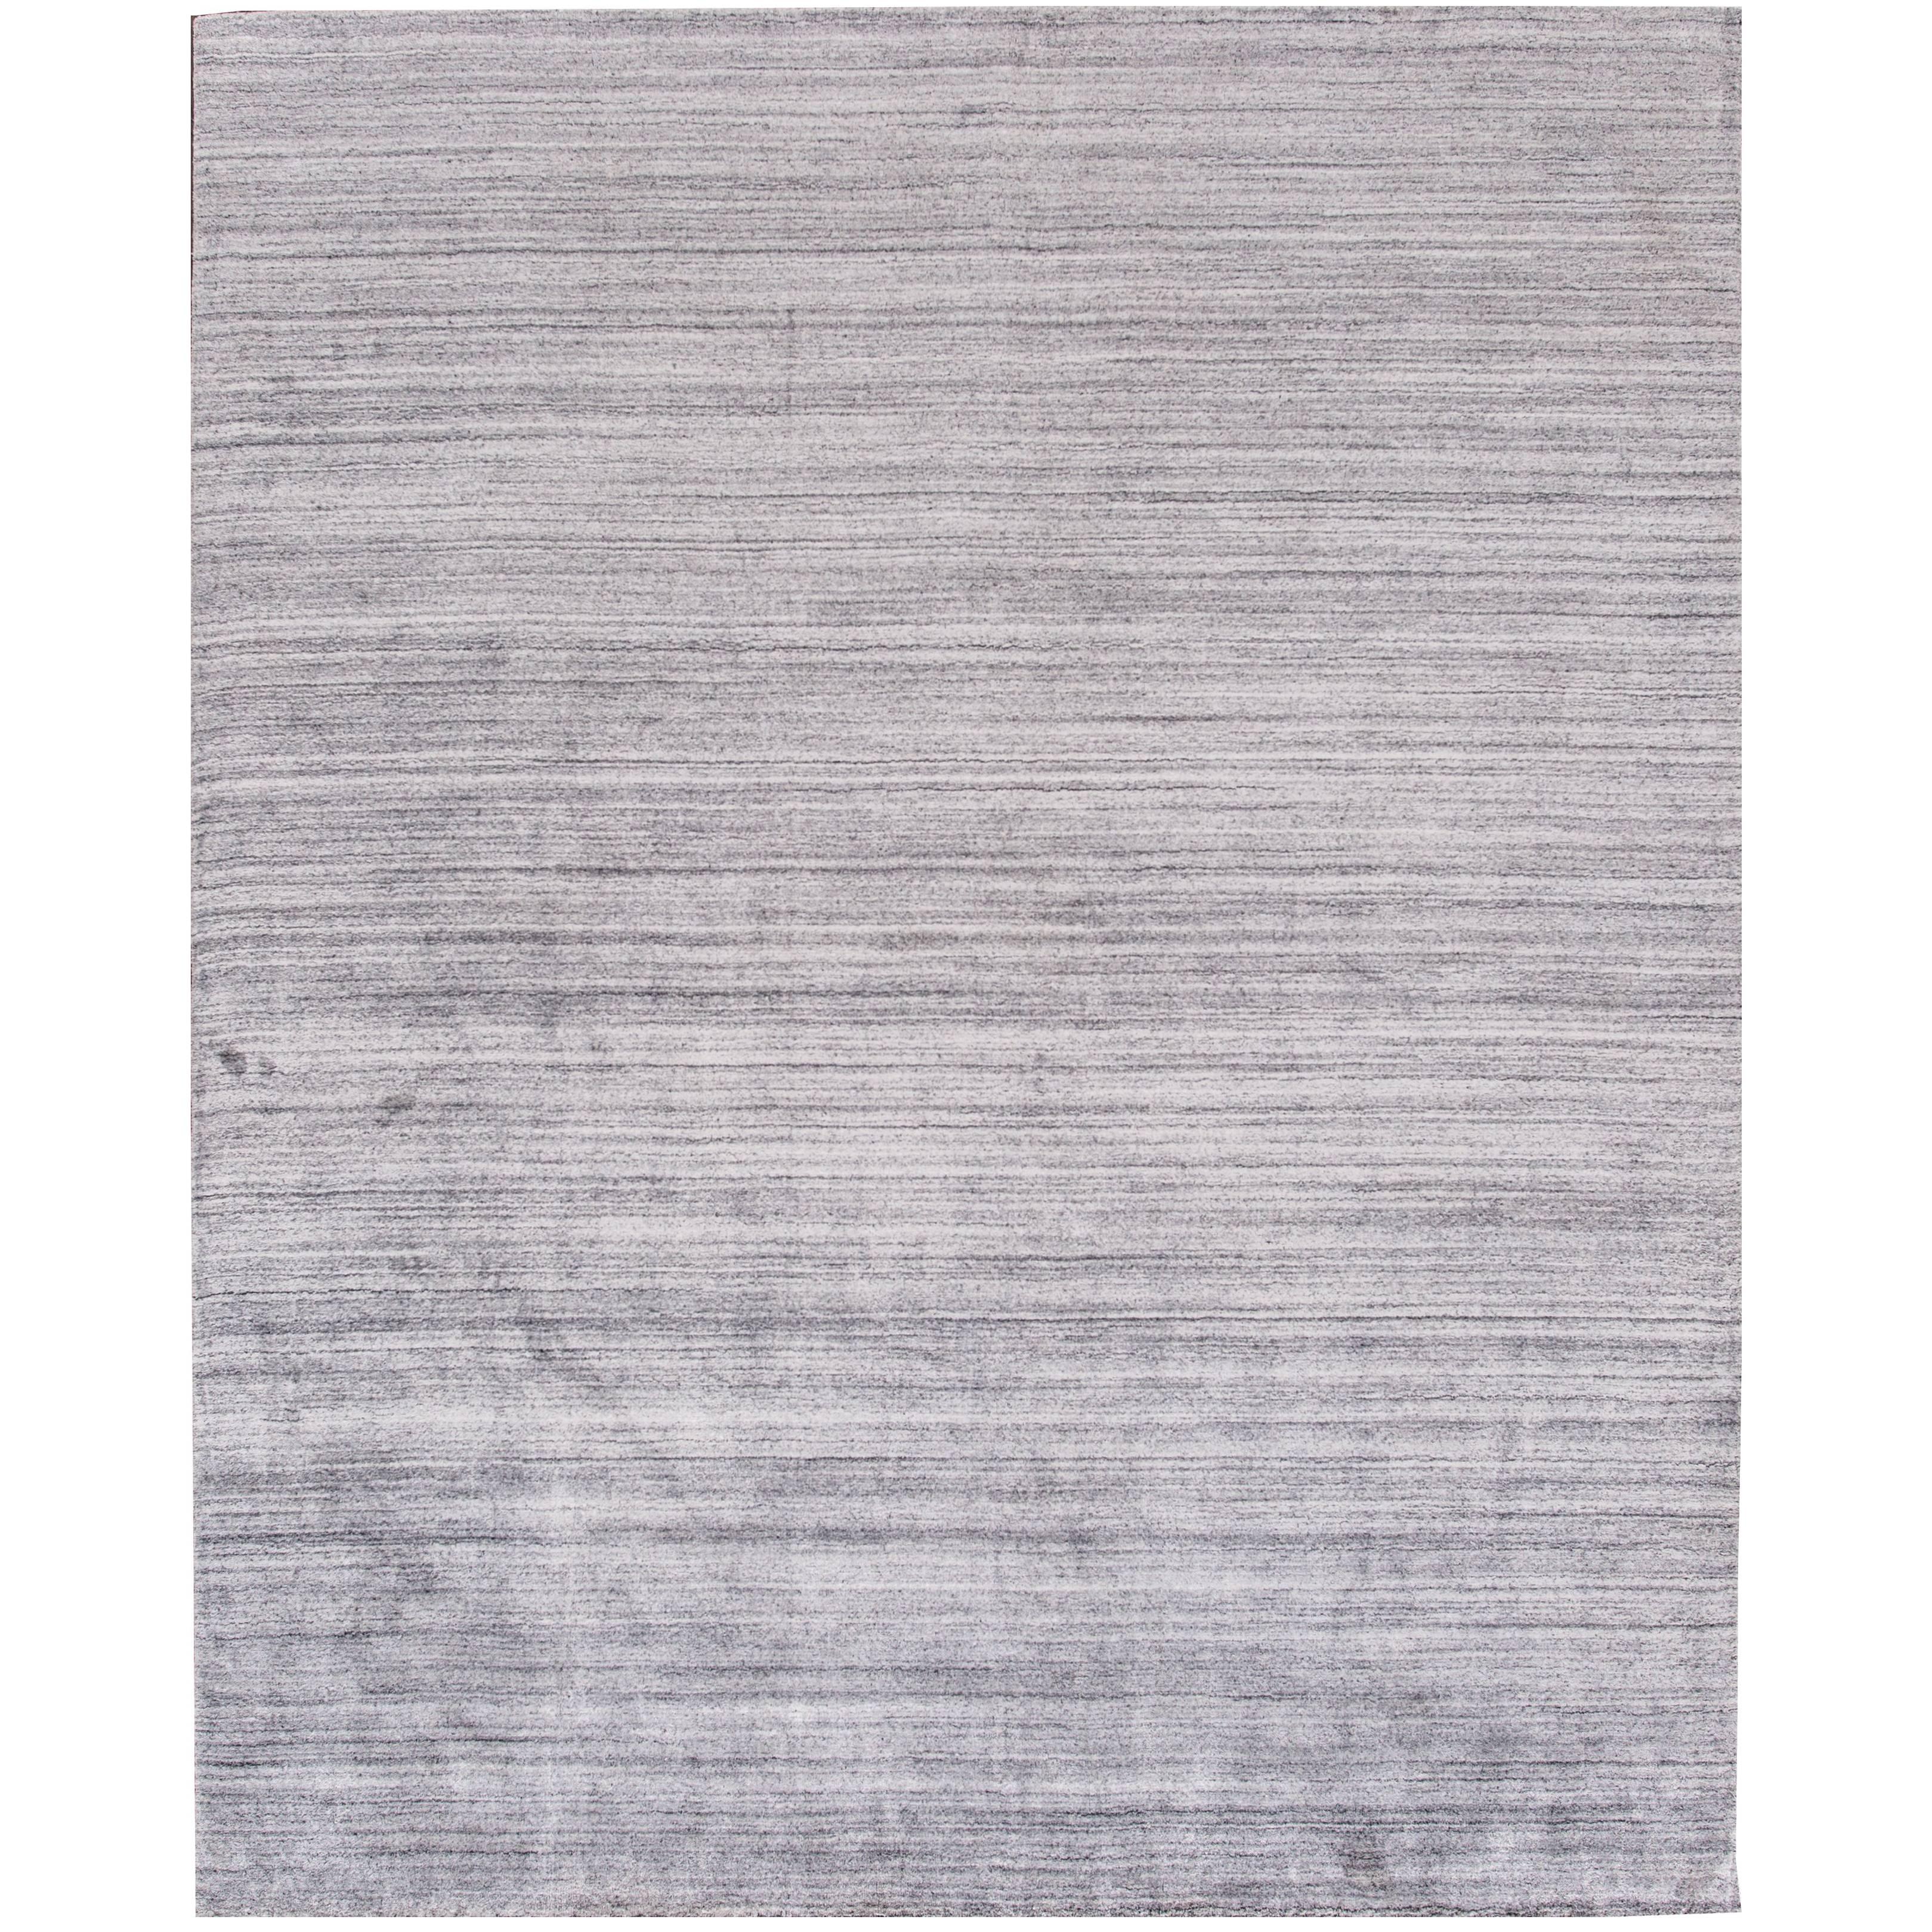 Simply Gorgeous Modern Loom Knotted Rug For Sale